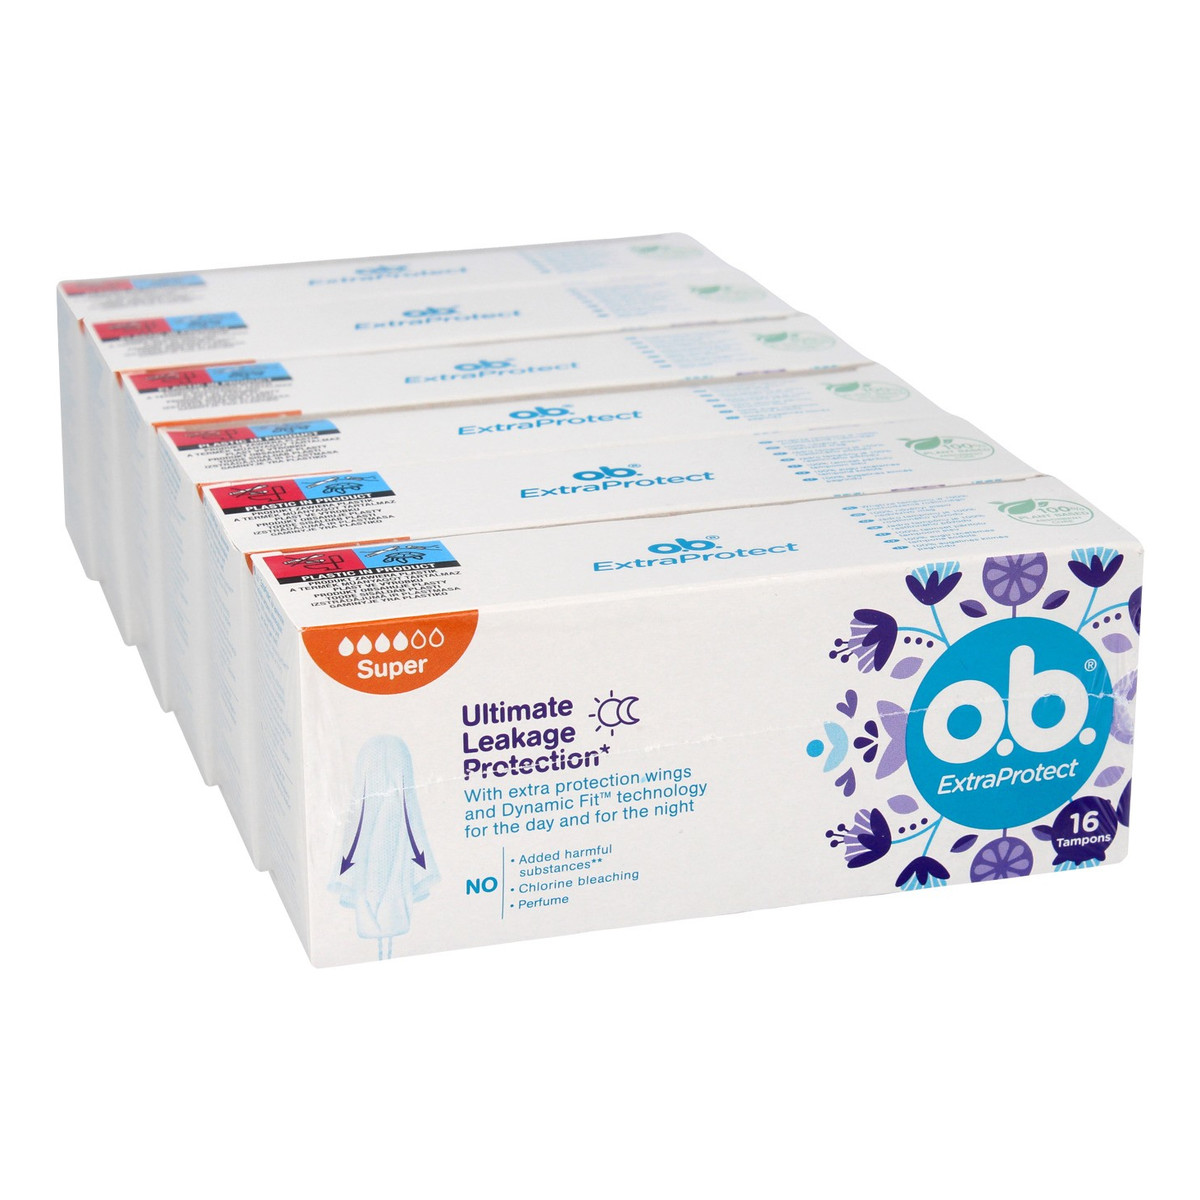 O.B. Extra Protect Tampony Ultimate Super (16) 1op.-6szt 5 +1gratis